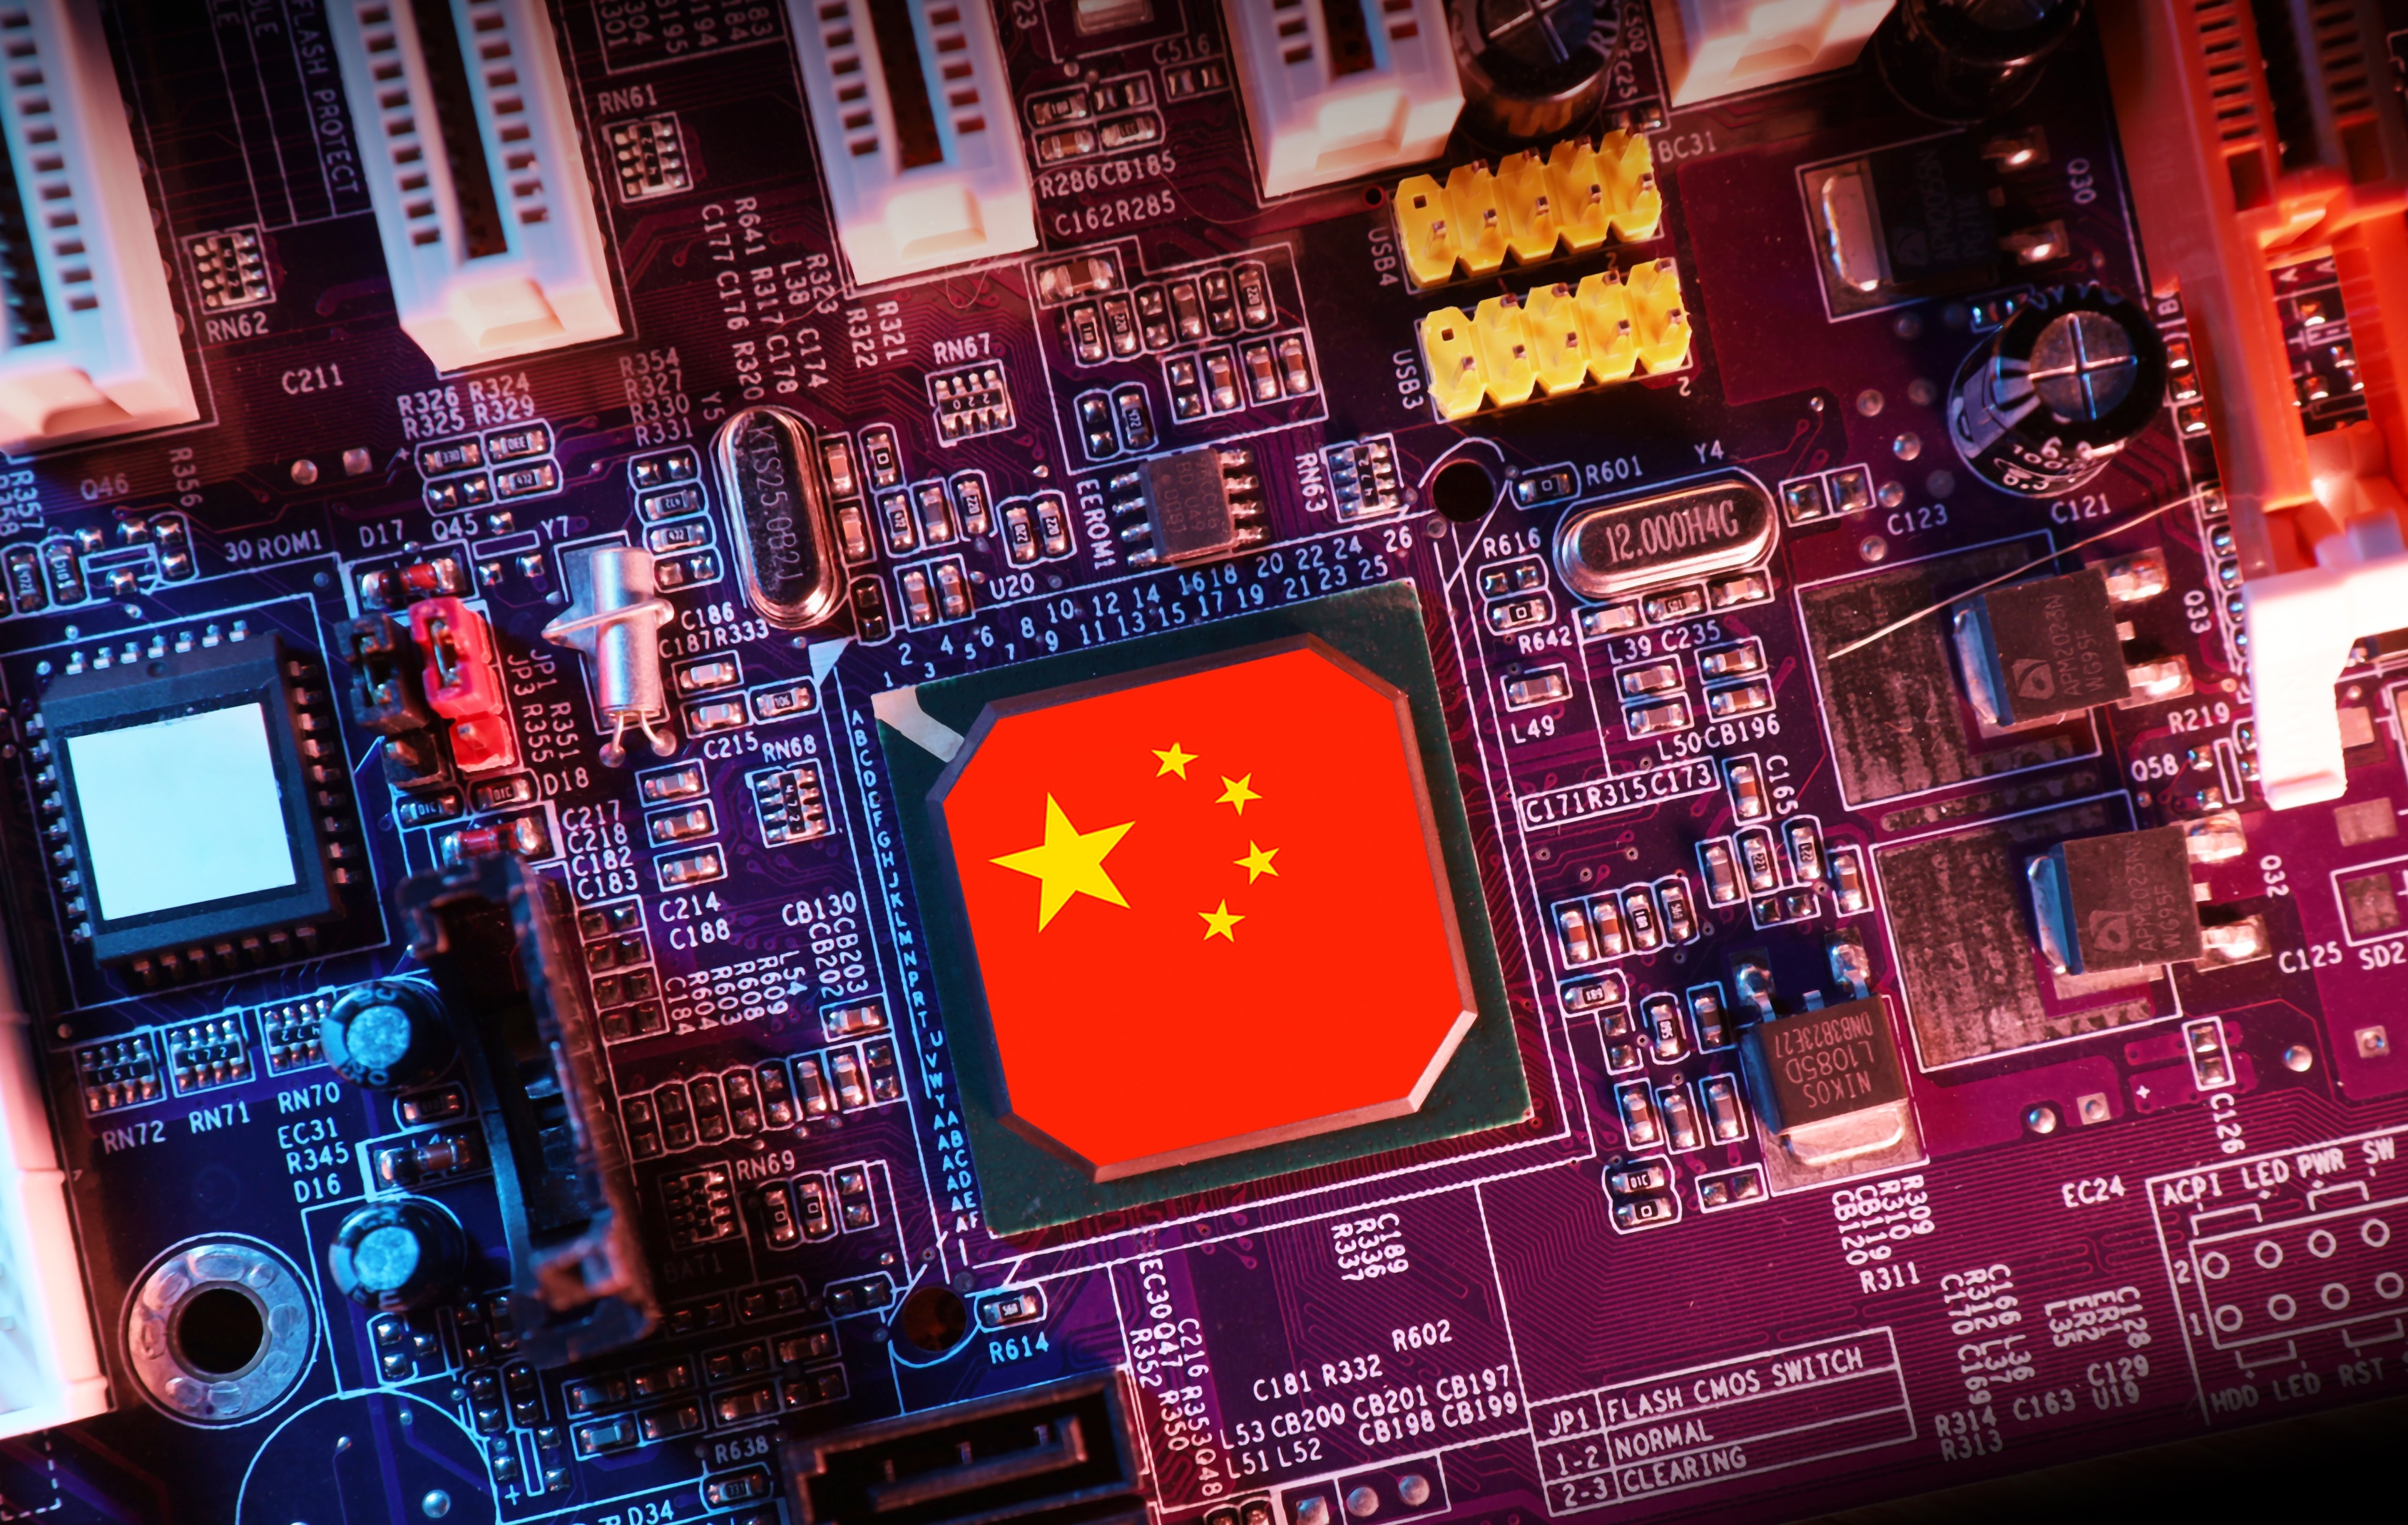 The Chinese flag is seen on a microprocessor attached to a circuit board in this photo illustration. Photo: Shutterstock Images